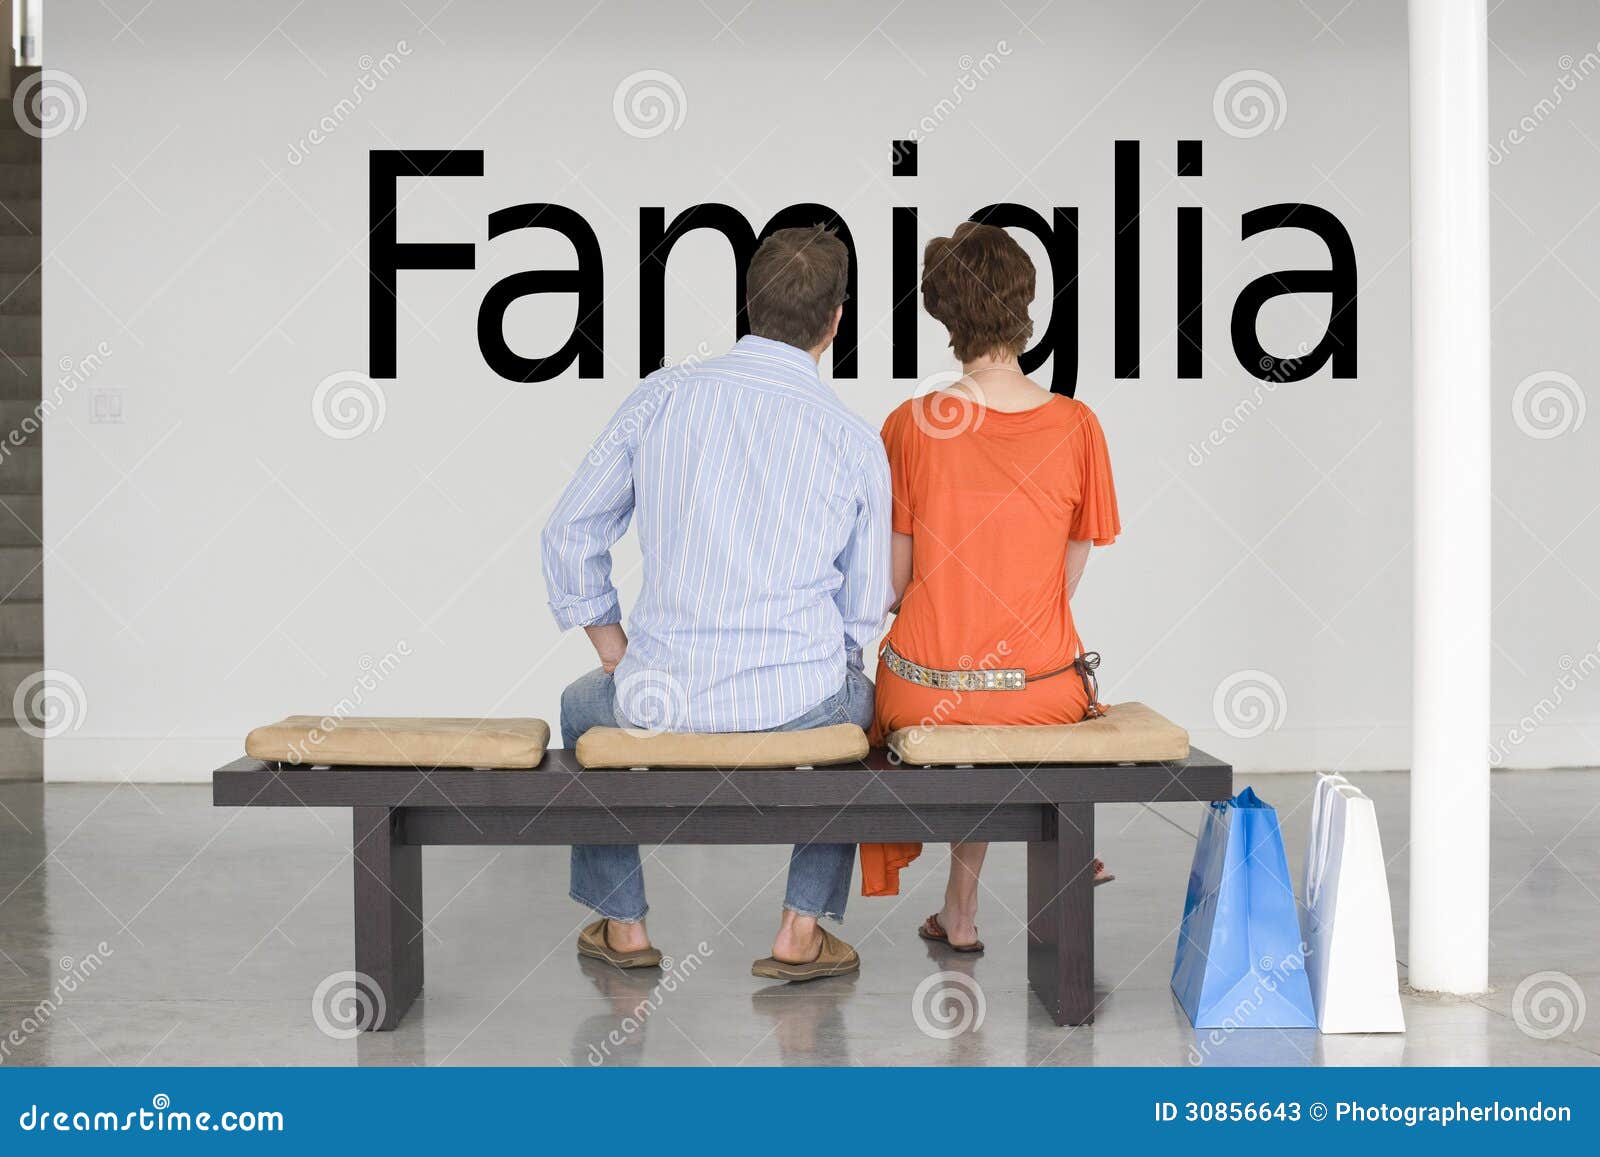 rear view of couple seated on bench reading italian text famiglia (family) on wall